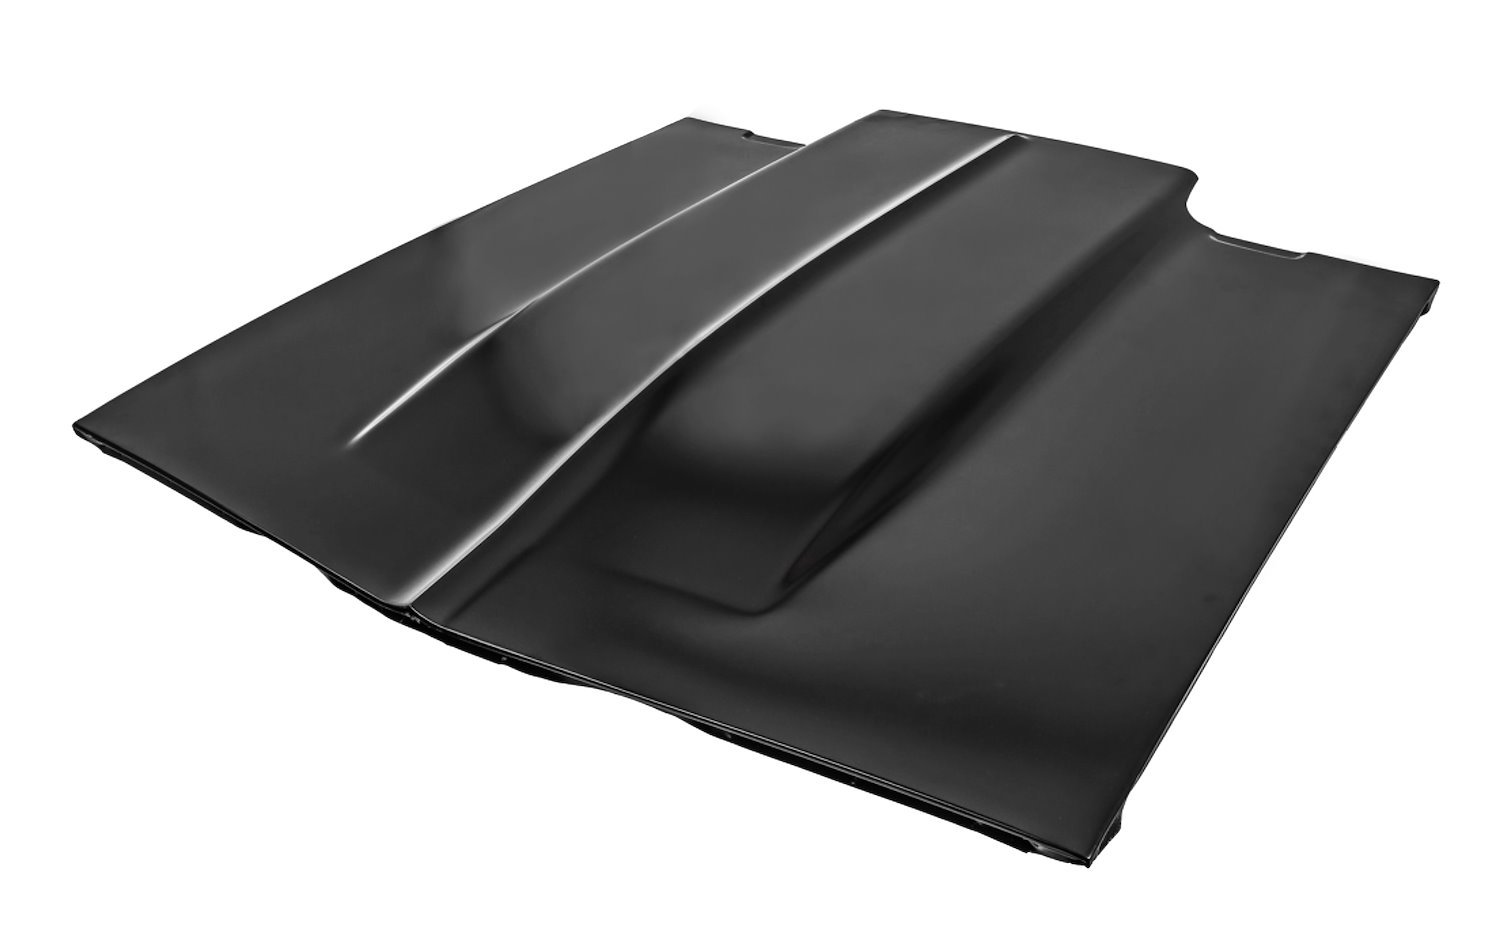 Steel Cowl Induction Hood for 1967-1969 Chevy Camaro [GM 3949708]